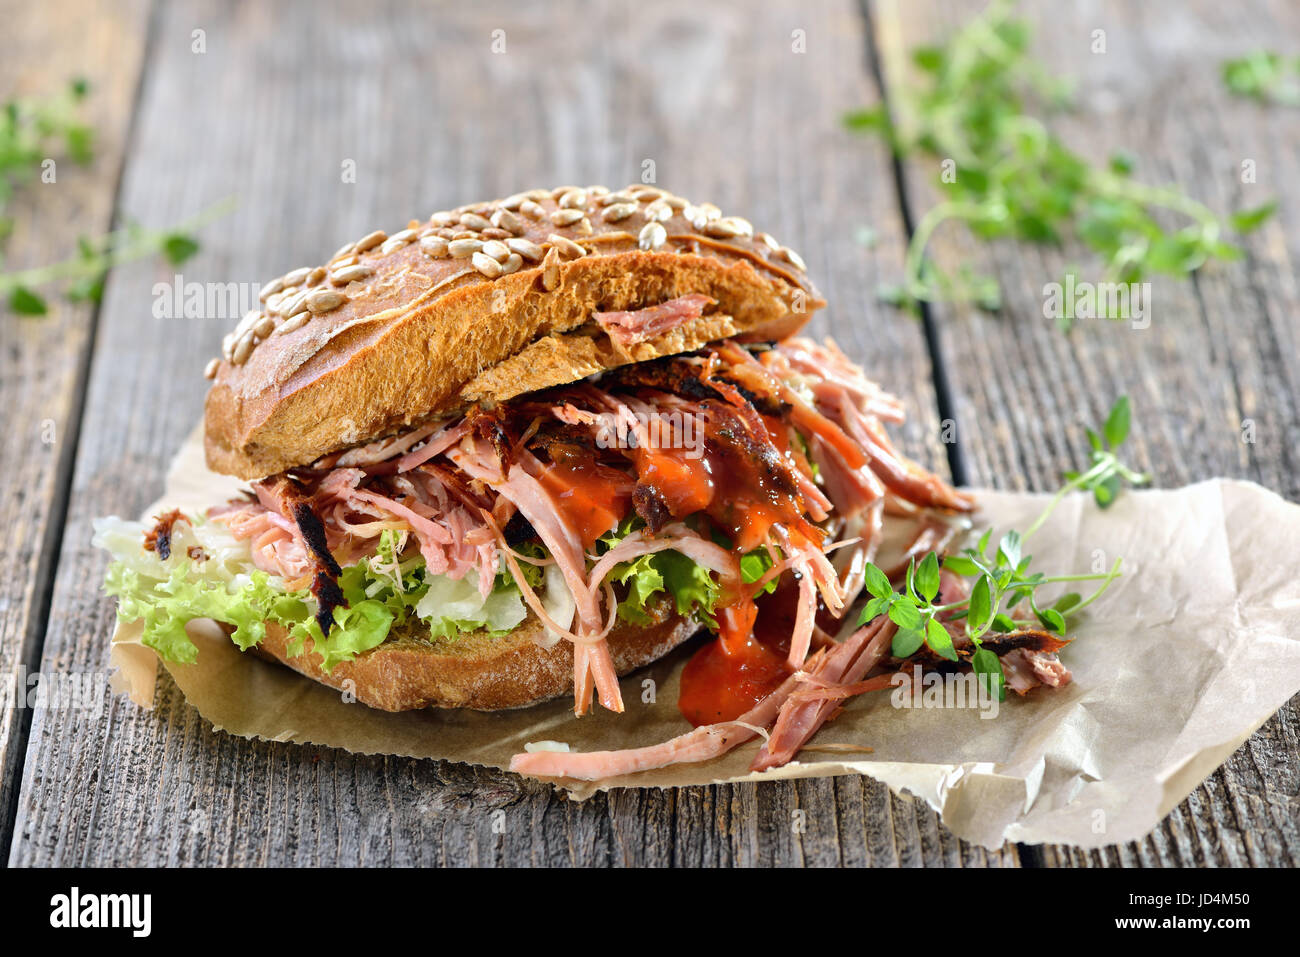 Street food: Barbecue pulled pork wholemeal sandwich with coleslaw, hot BBQ sauce served on brown wrapping paper on a wooden background Stock Photo